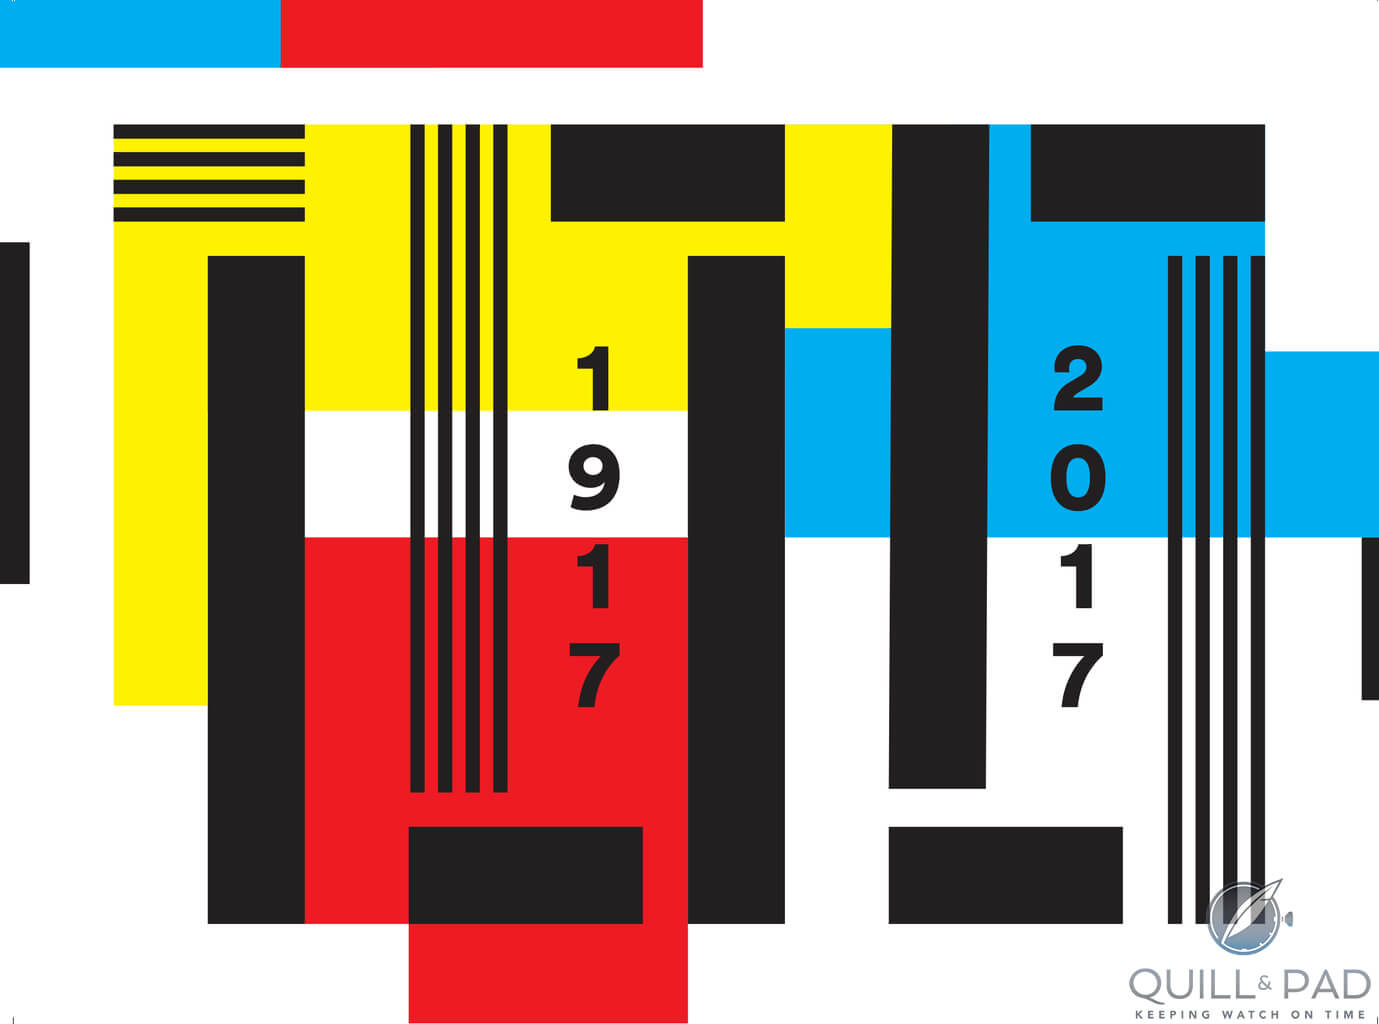 An official graphic commemorating the 100th anniversary of the de Stijl art movement